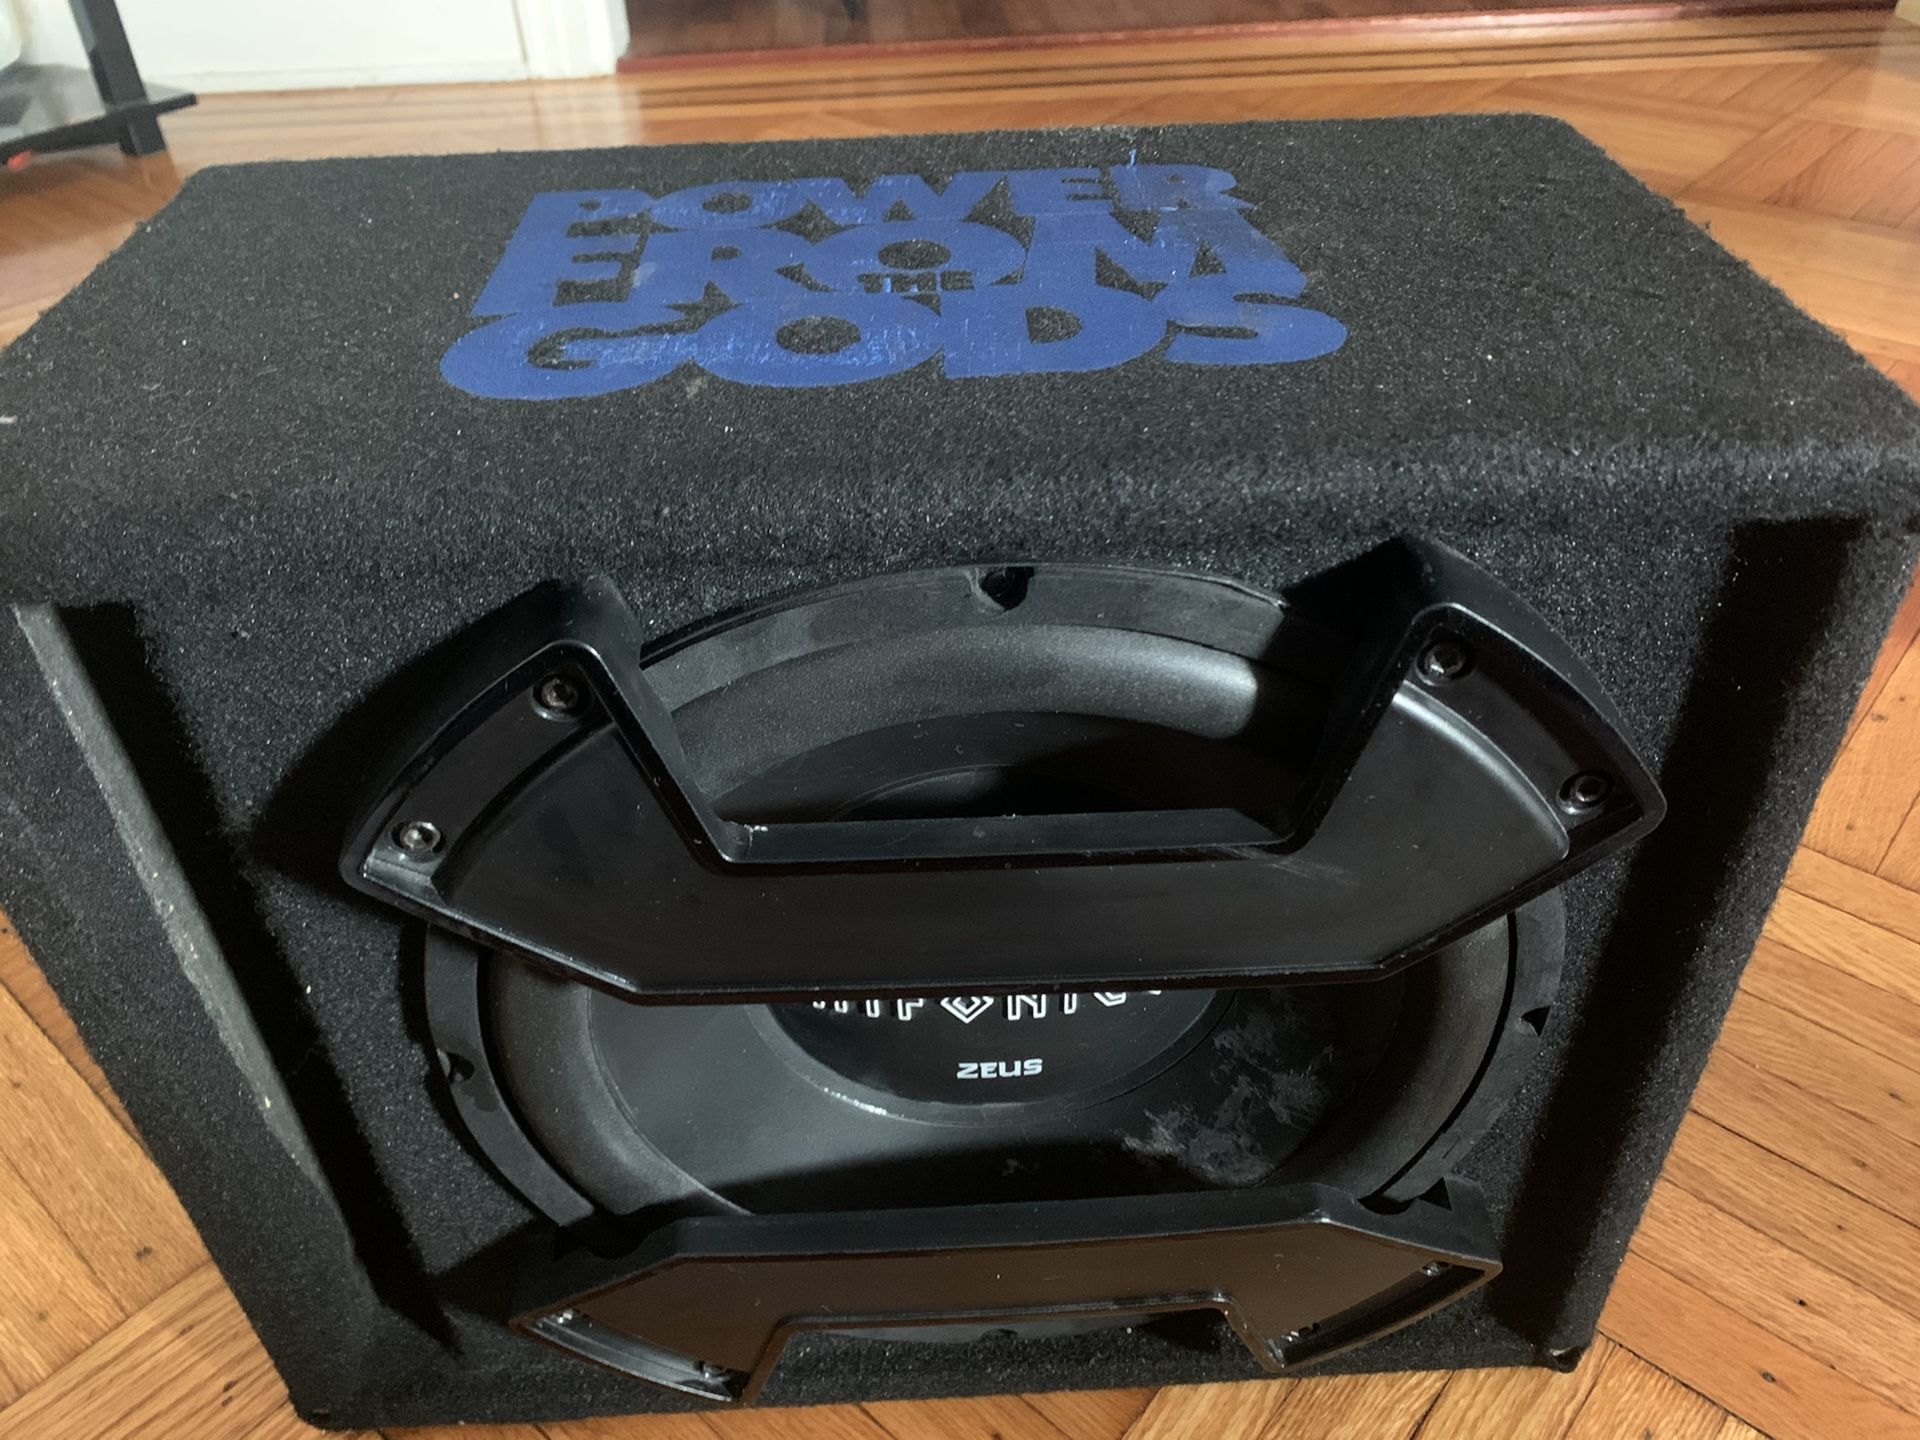 SUBWOOFER SELF POWERED (12”-600w ACTIVE)‼️ GOOD WORKIN CONDITION-HIFONIC ZEUS‼️